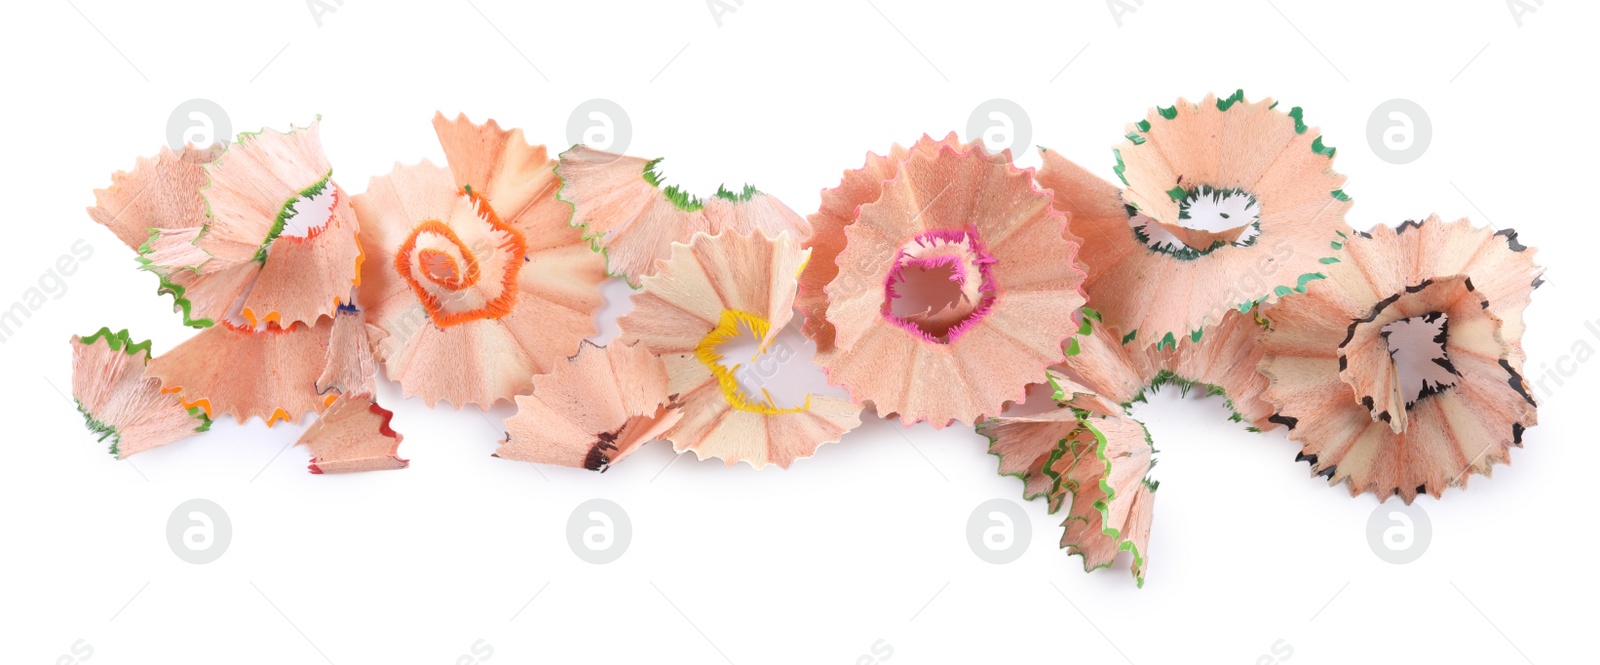 Photo of Colorful wooden pencil shavings on white background, top view